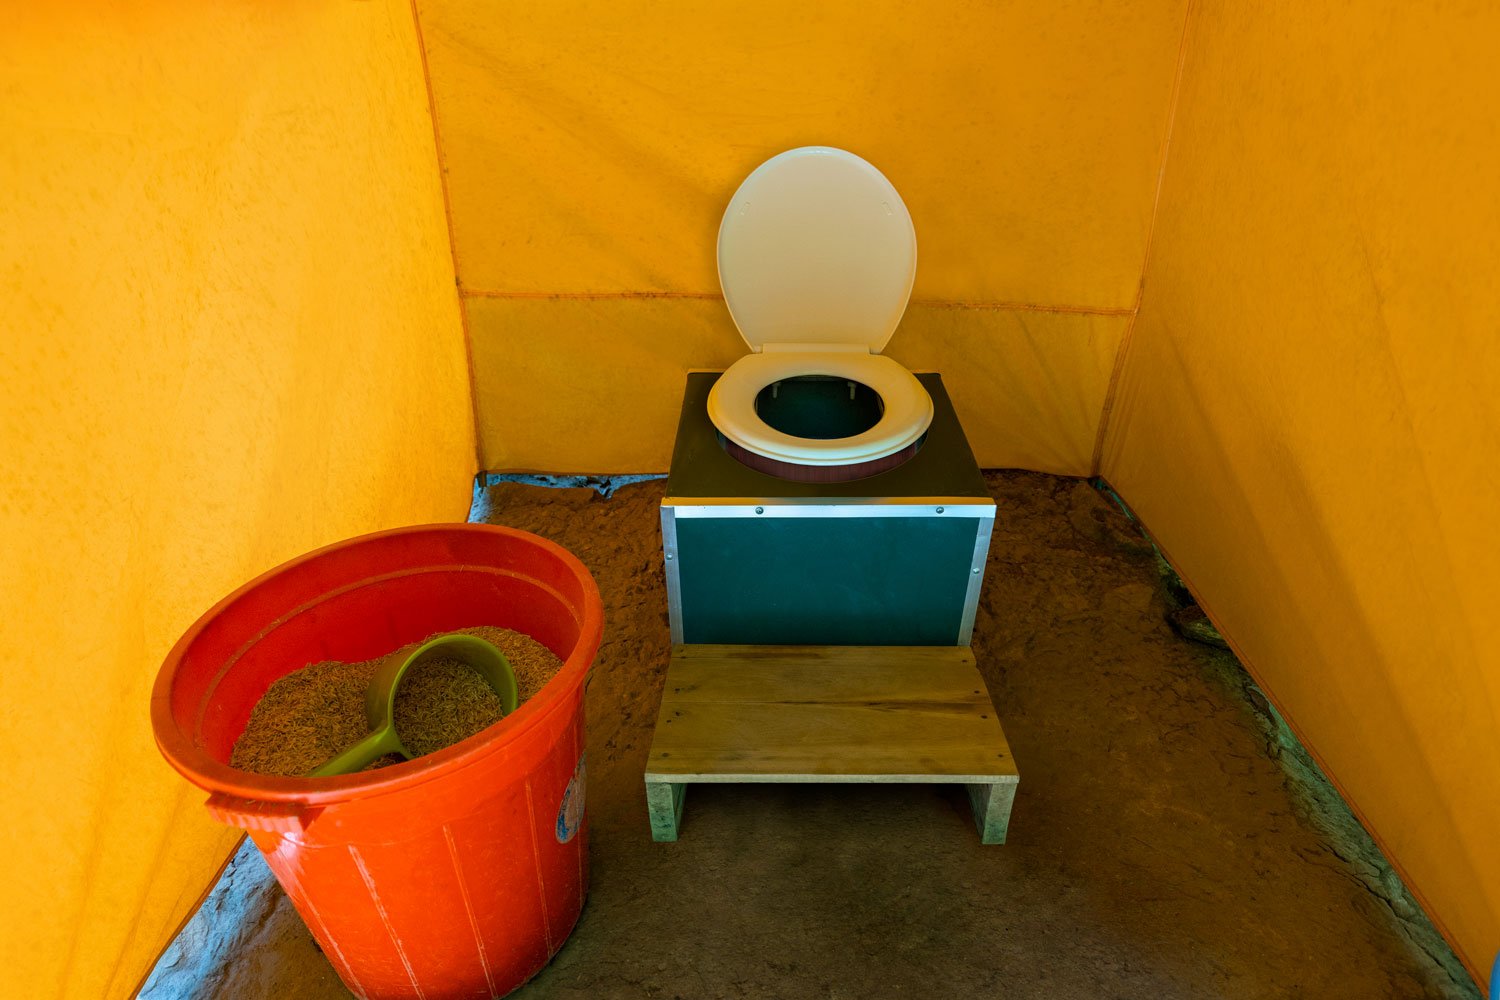 Oxalis composting toilets are available at every campsite on tour